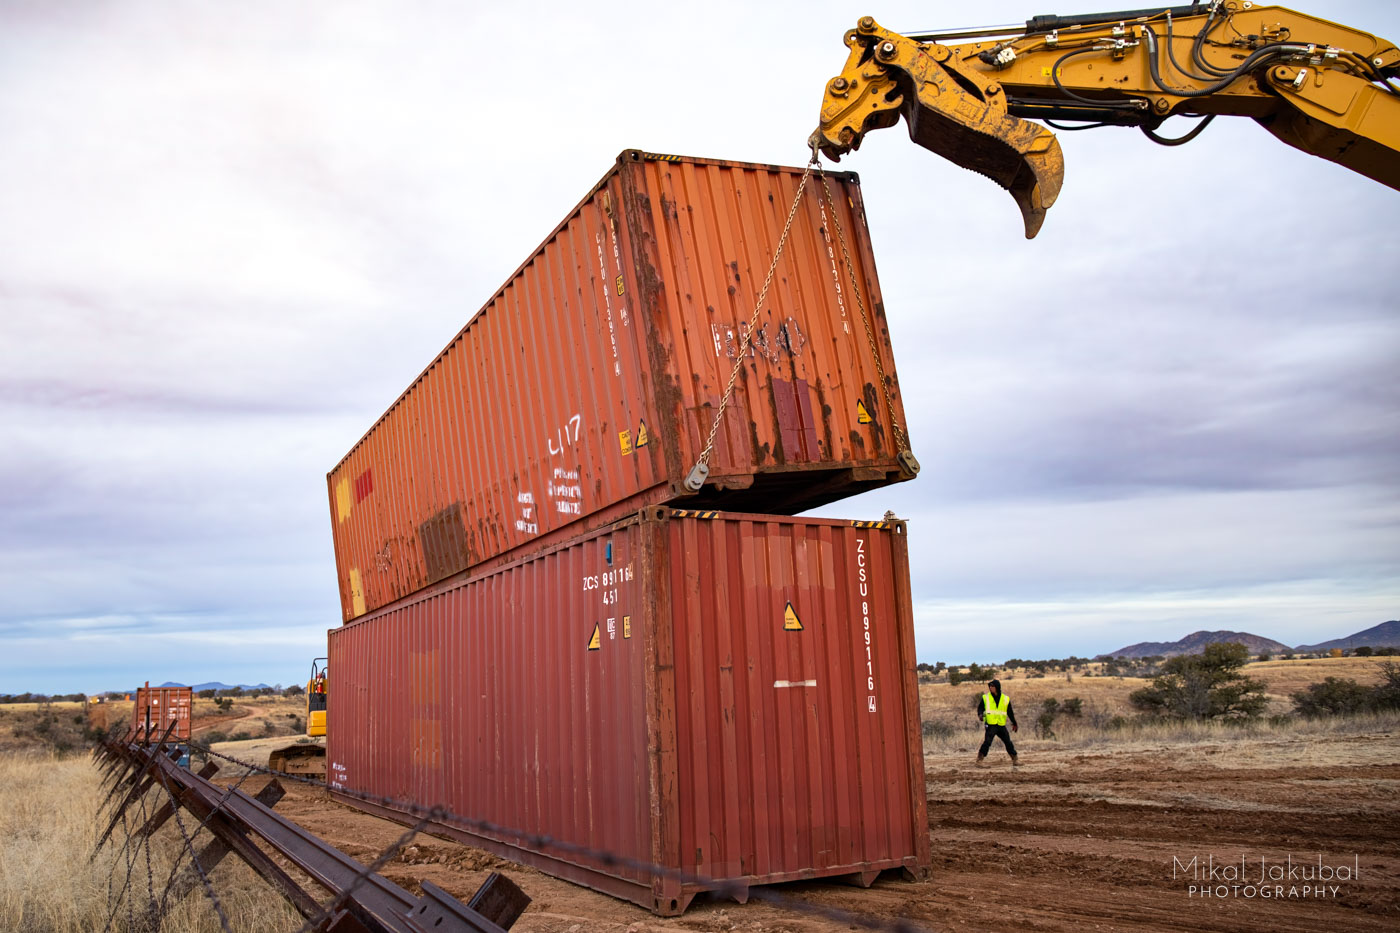 The steel arm of a large excavator lifts one shipping container off the top of another one with two large chains. The container appears to be about to tip over, but is in fact held securely by the chains. A worker in a yellow vest walks nearby.